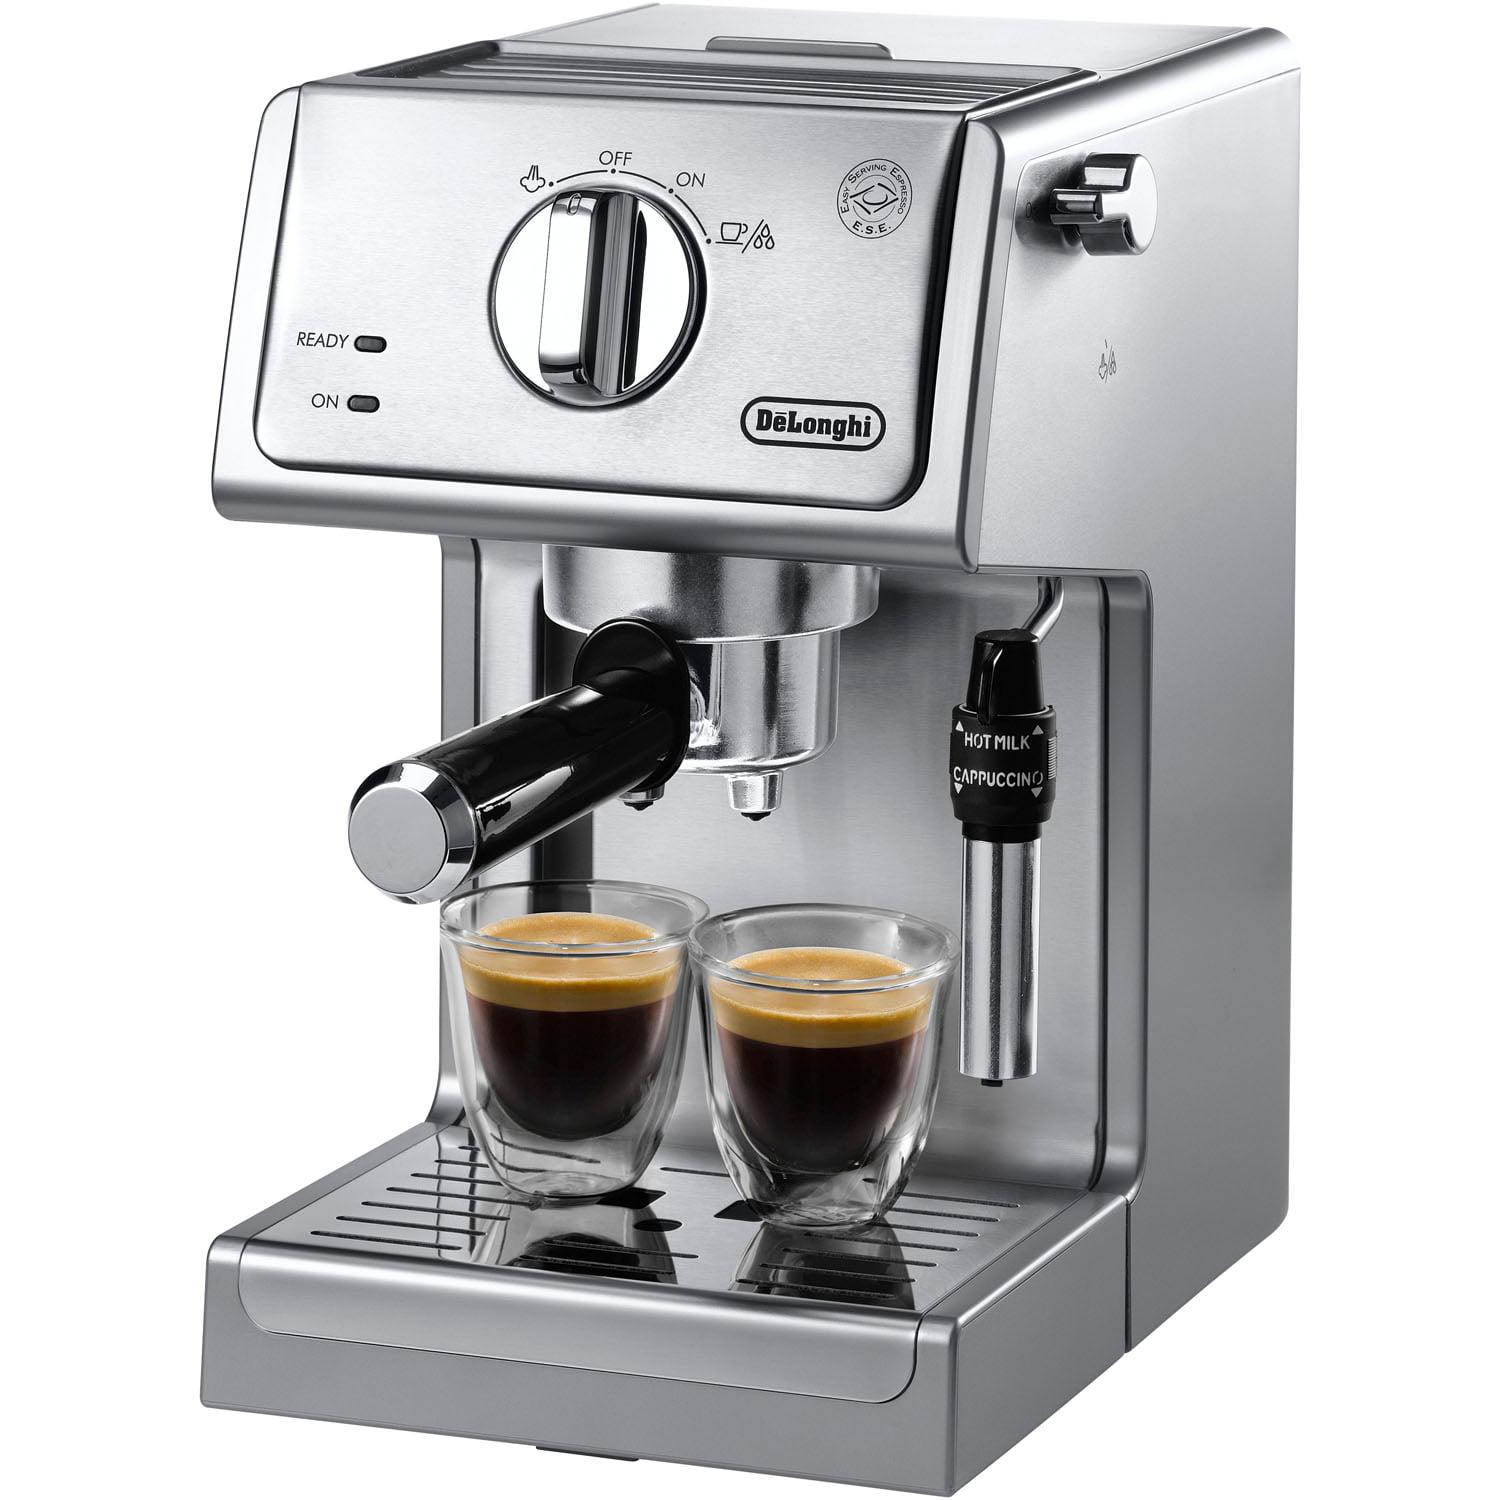 De'Longhi Ecp3630 15 Bar Espresso and Cappuccino Machine with Adjustable Advanced Cappuccino System $146.00 + Free Shipping